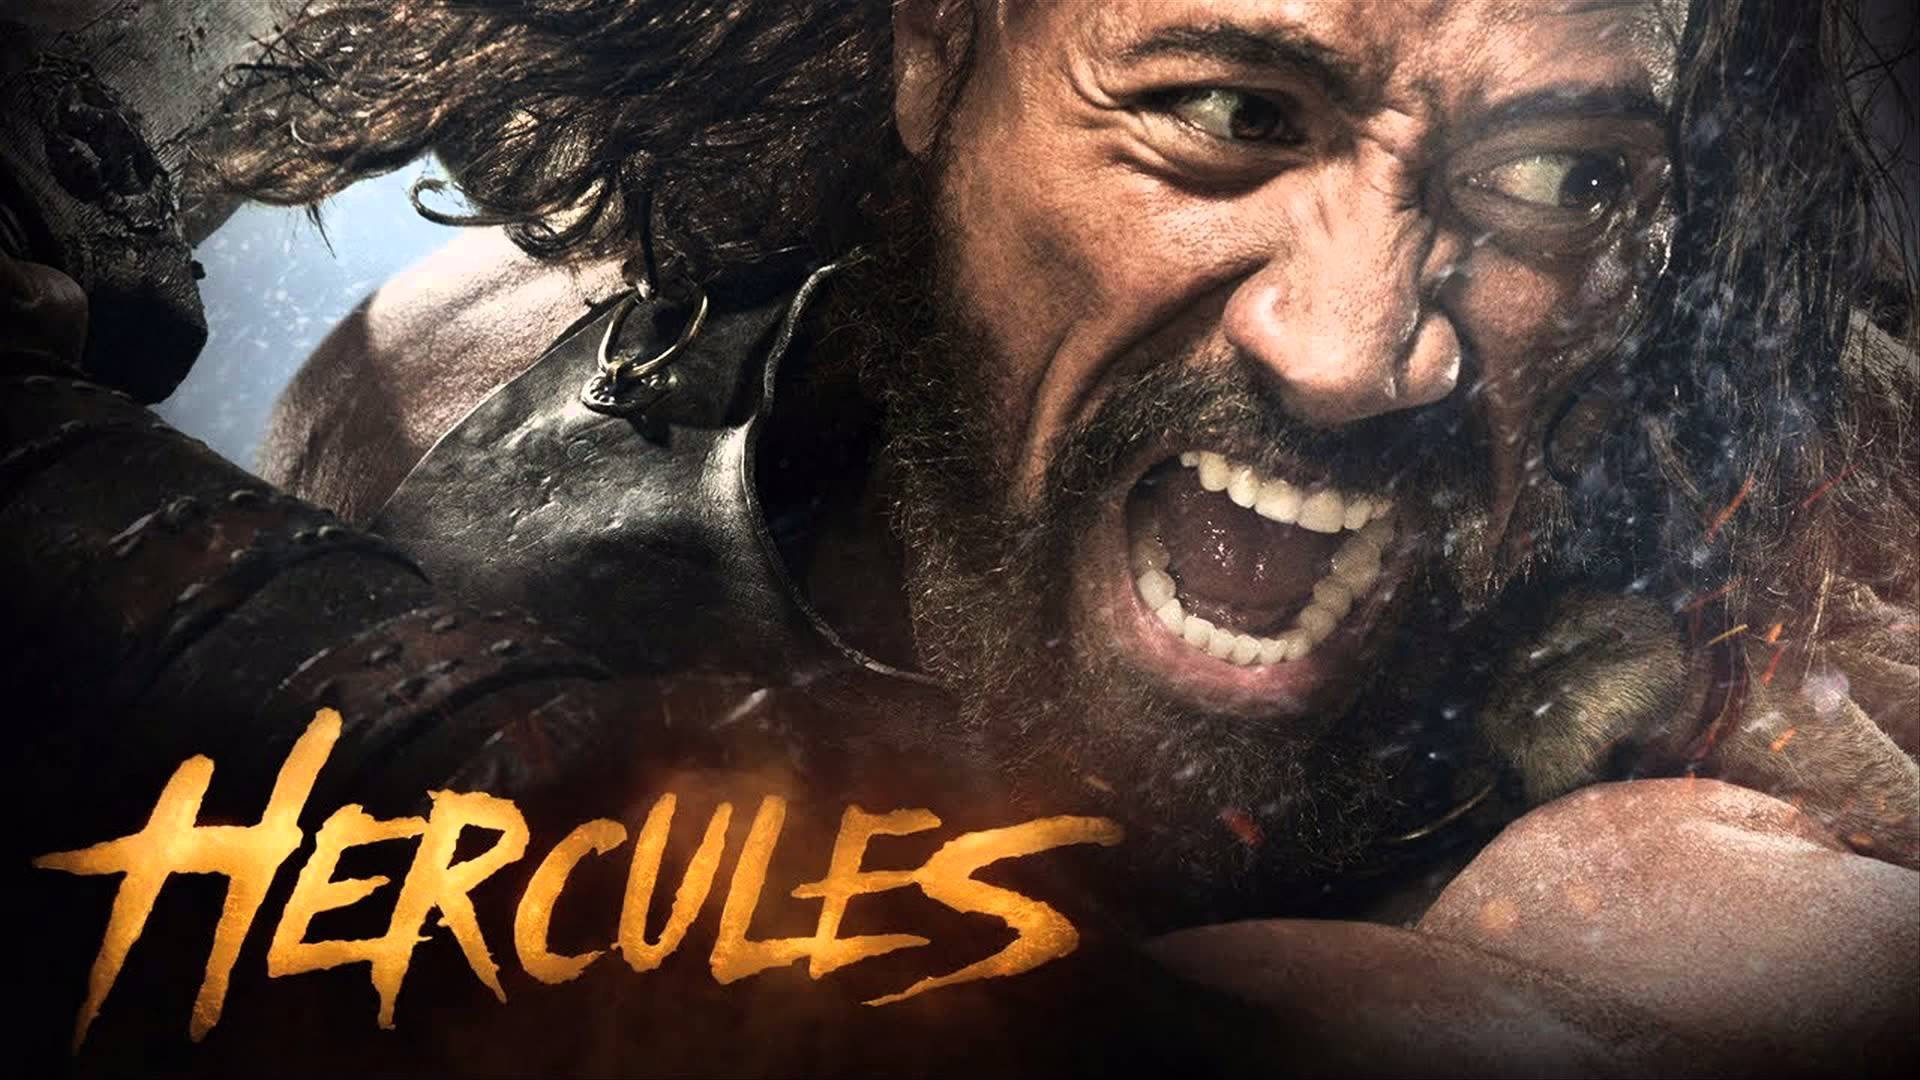 Hercules Movie Poster With Dwayne Background